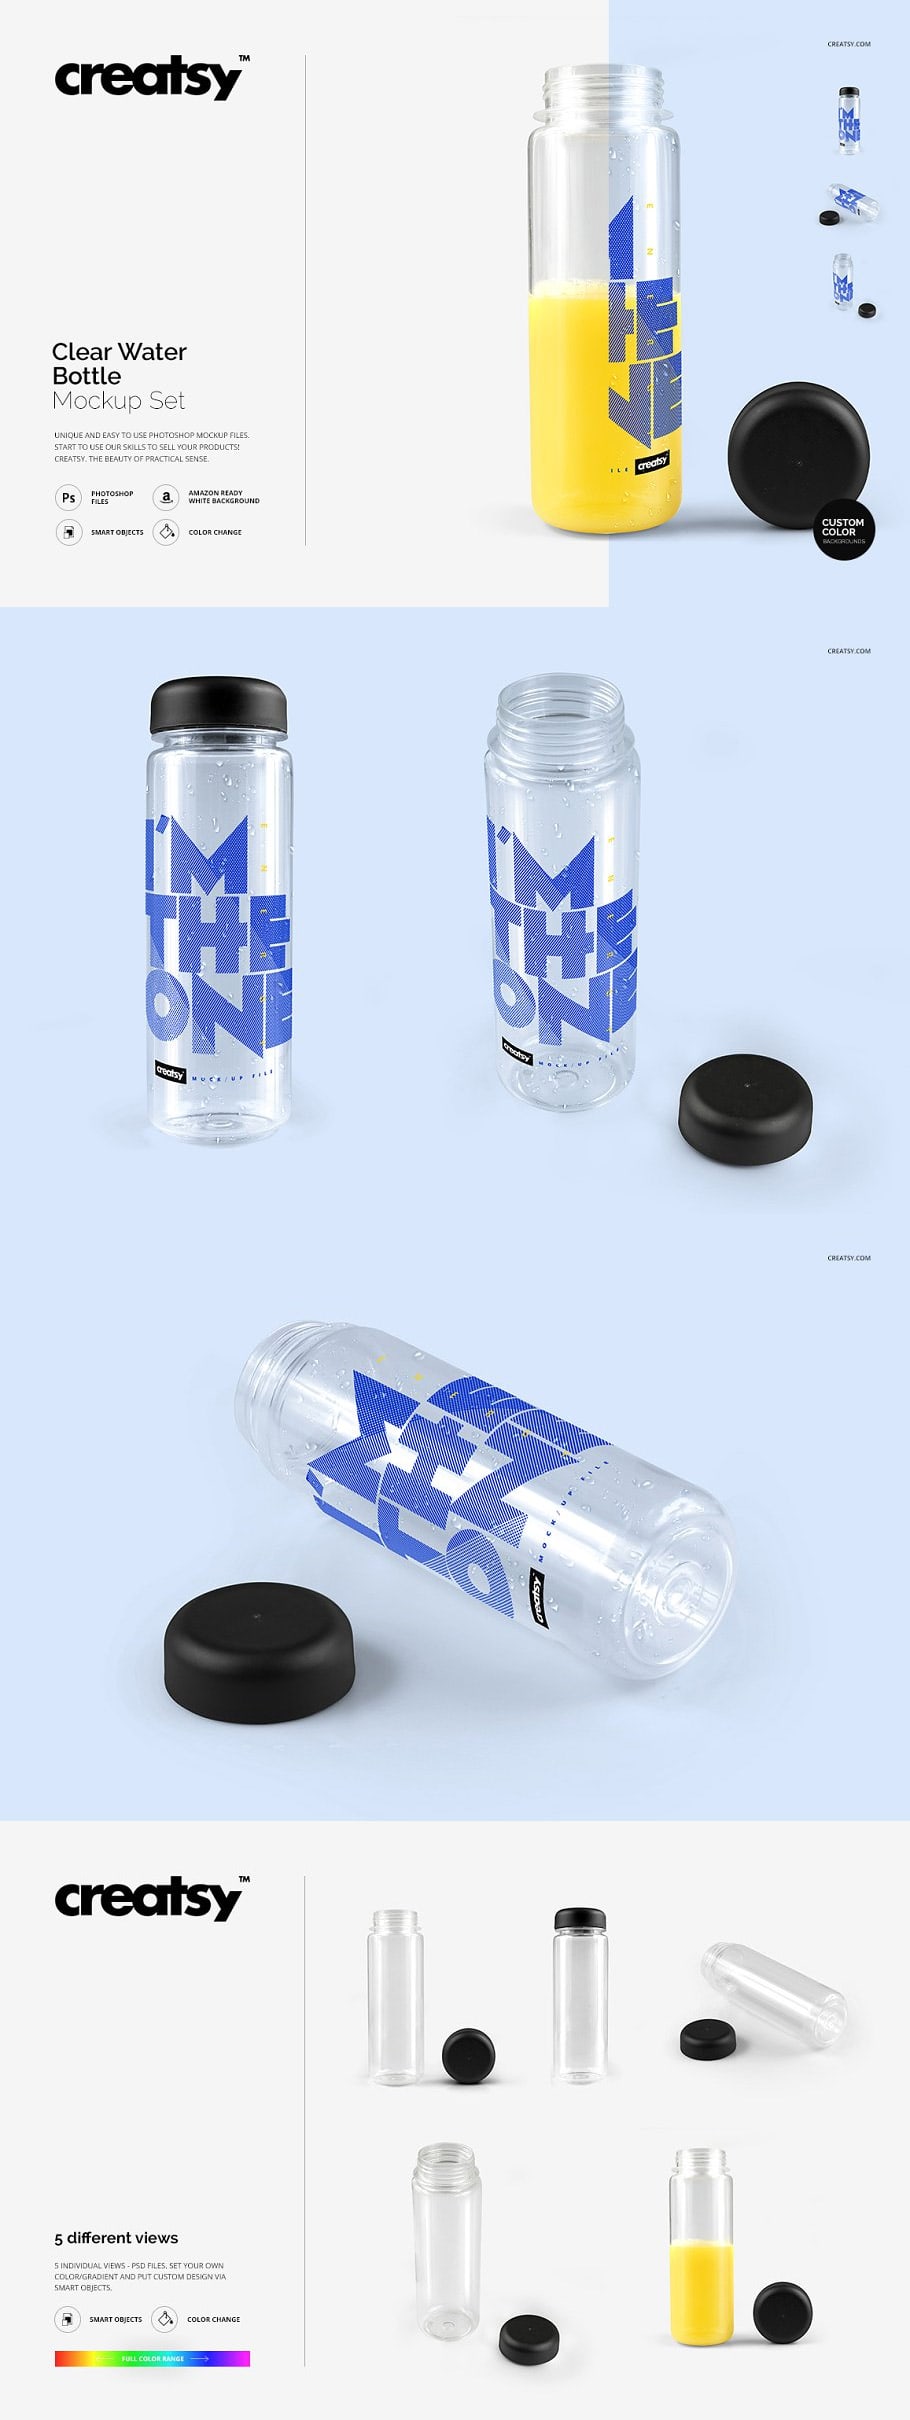 Download Clear Water Bottle Mockup Set Find The Perfect Creative Mockups Freebies To Showcase Your Project To Life